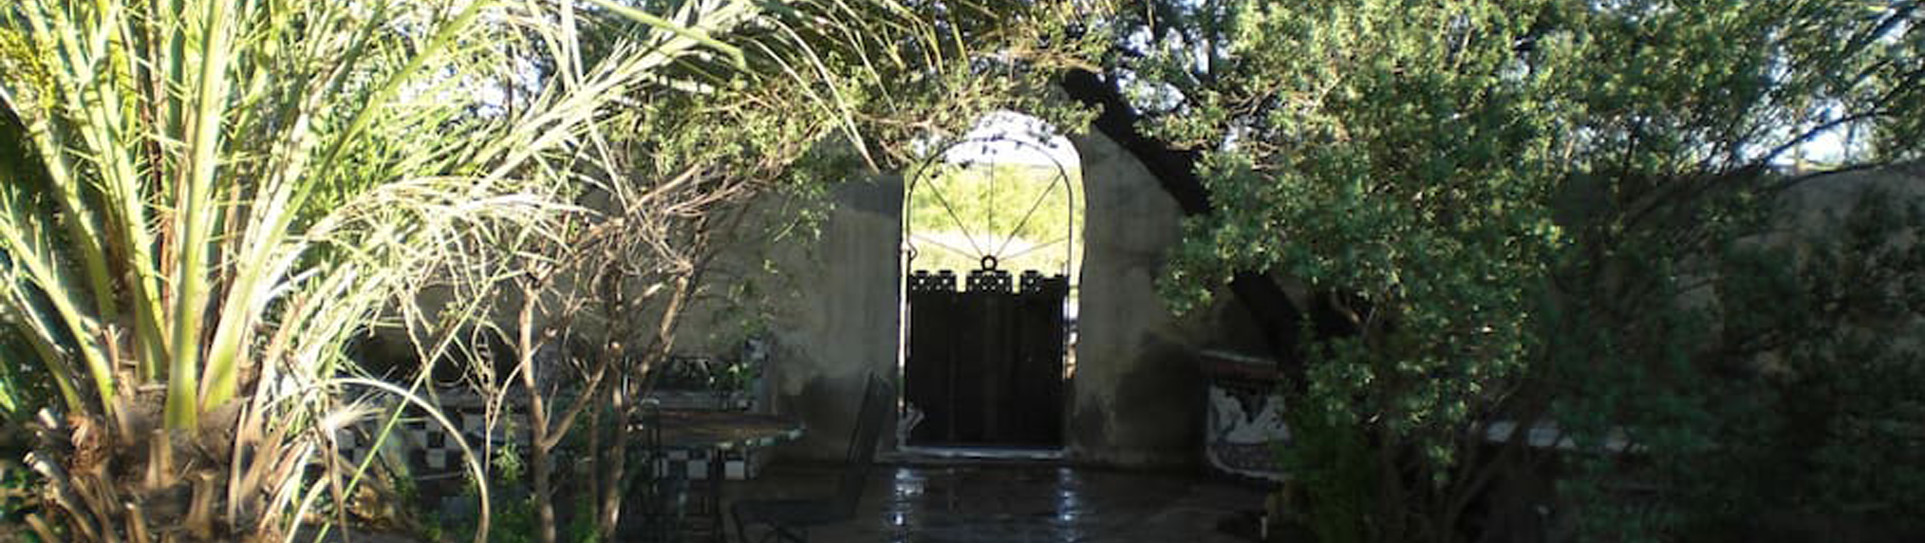 image of the patio and metal gate